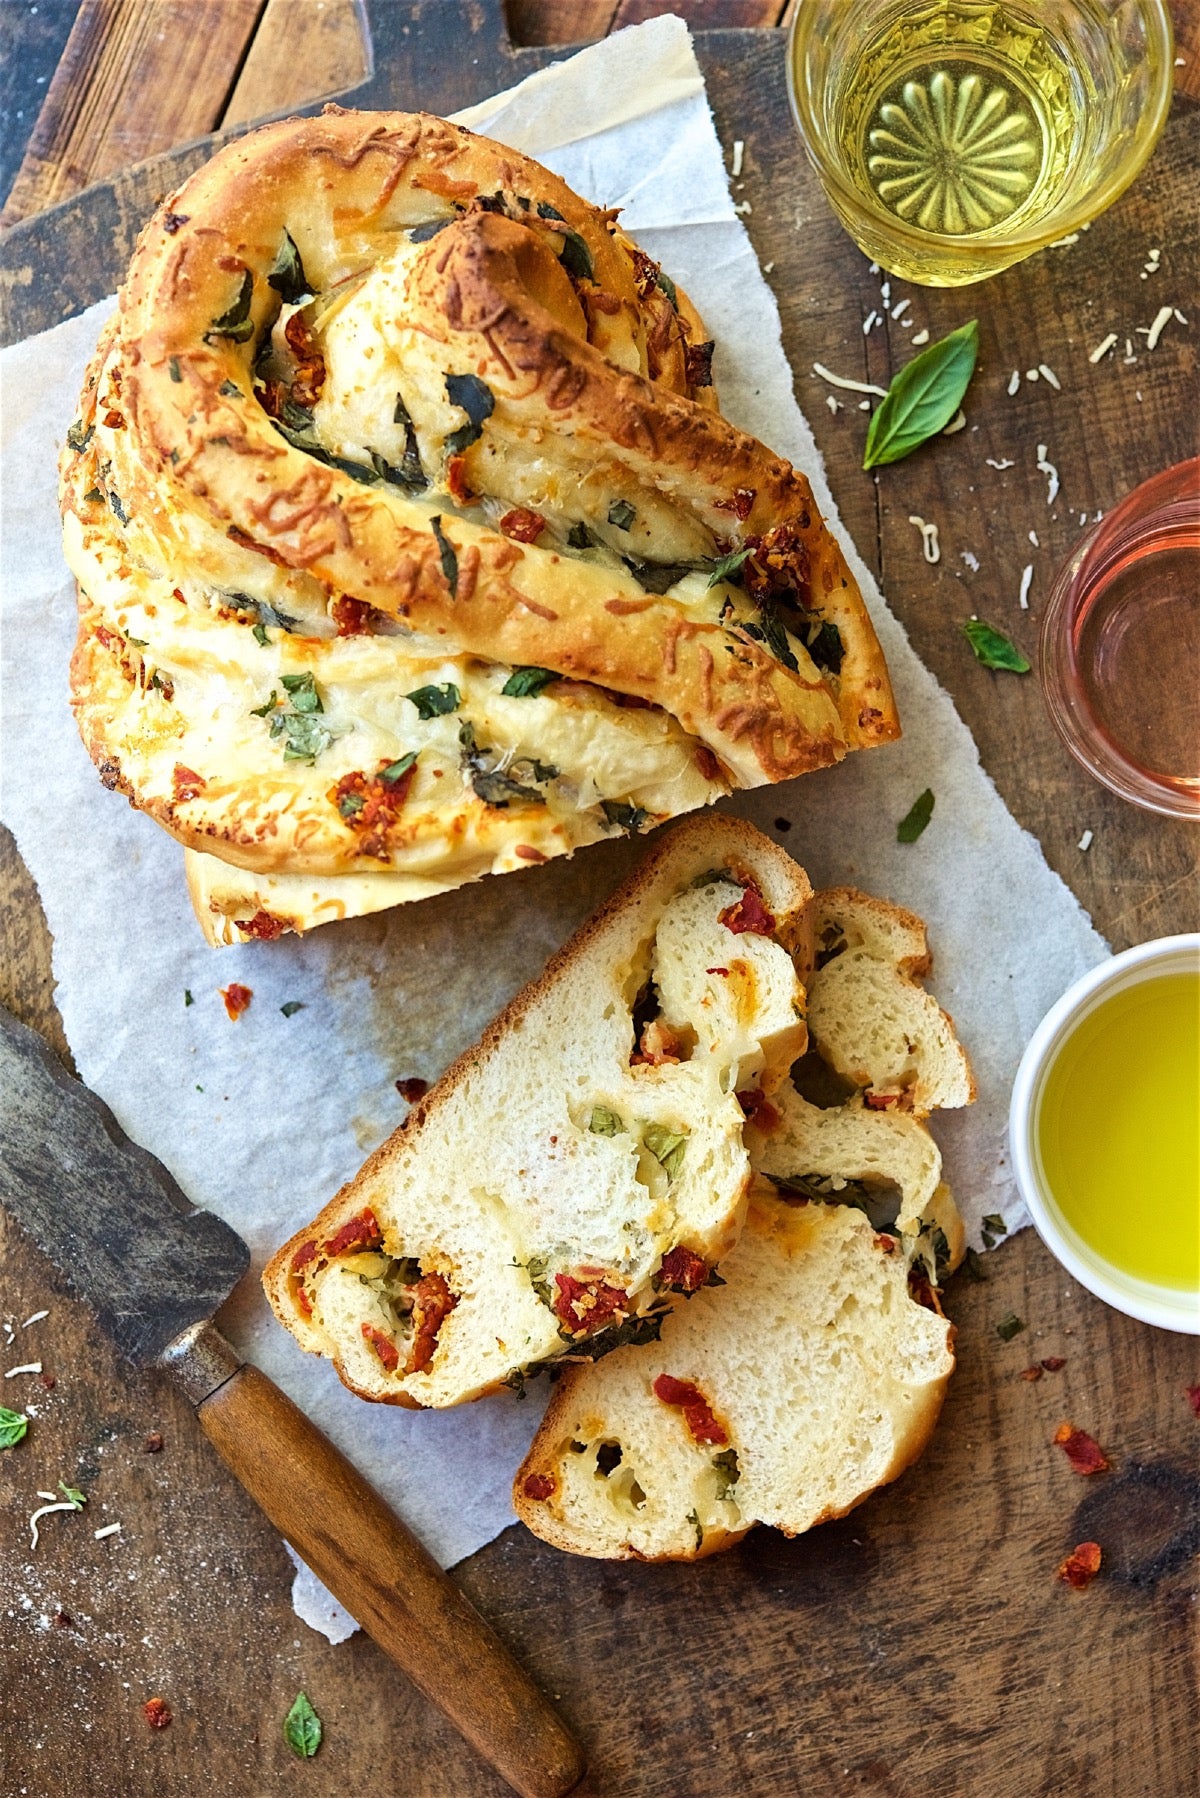 Pane Bianco, a filled. twisted bread stuffed with roasted tomatoes, cheese, garlic, and basil.